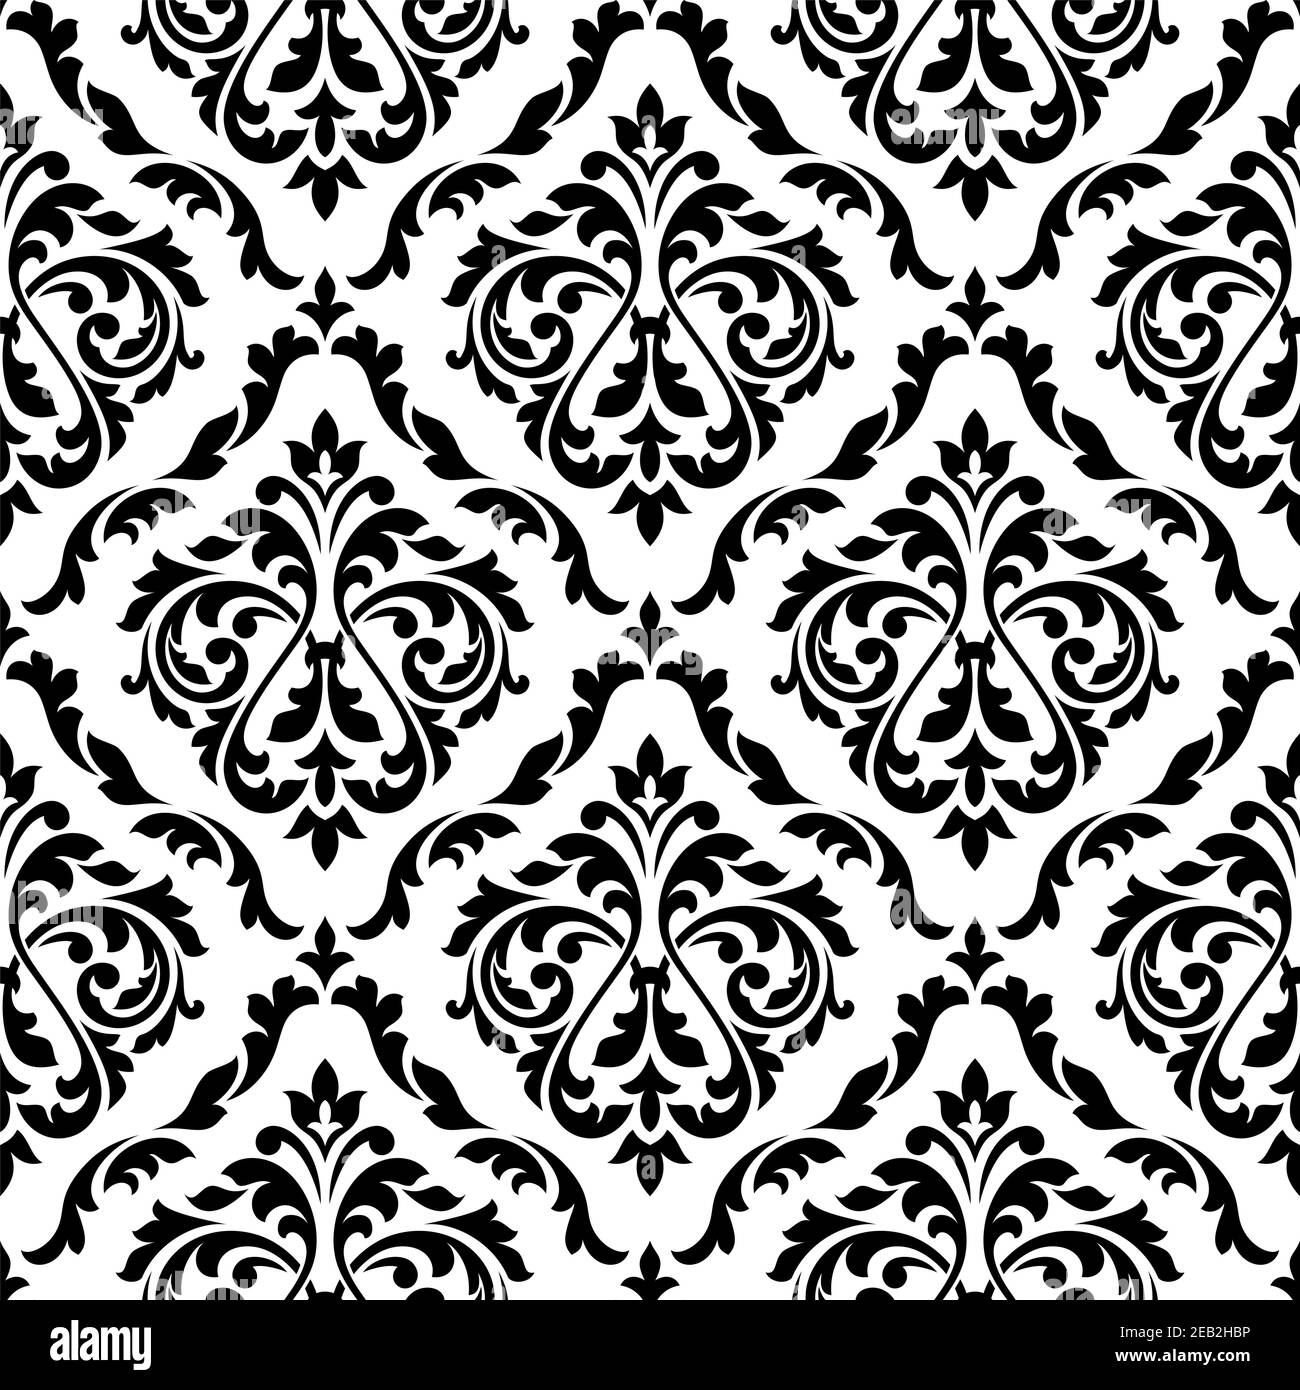 Black and white damask floral seamless pattern with elegant flower buds for wallpaper and background design stock vector image art